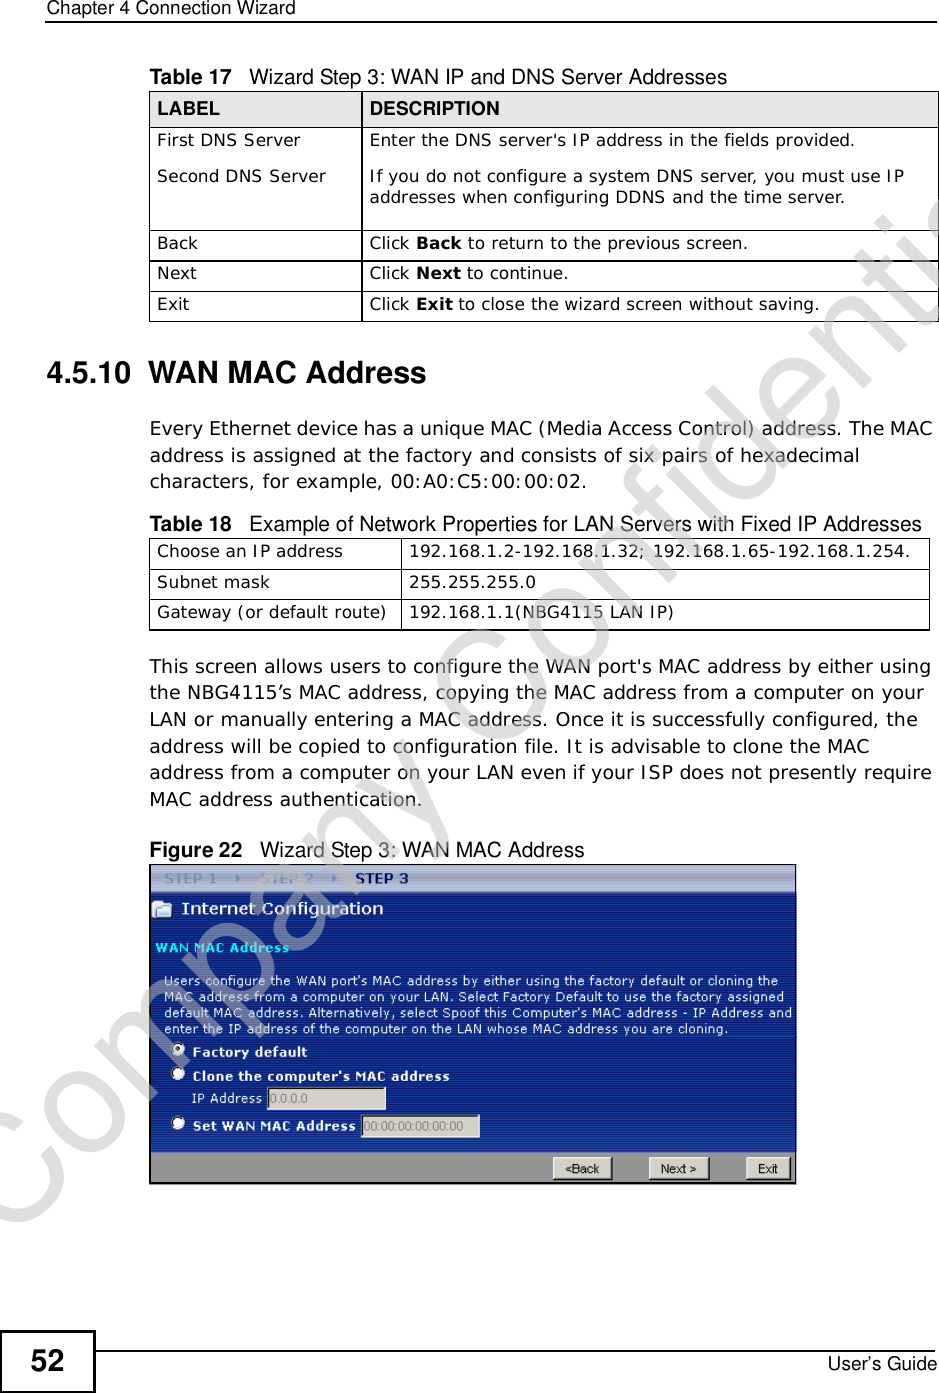 Chapter 4Connection WizardUser’s Guide524.5.10  WAN MAC AddressEvery Ethernet device has a unique MAC (Media Access Control) address. The MAC address is assigned at the factory and consists of six pairs of hexadecimal characters, for example, 00:A0:C5:00:00:02.This screen allows users to configure the WAN port&apos;s MAC address by either using the NBG4115’s MAC address, copying the MAC address from a computer on your LAN or manually entering a MAC address. Once it is successfully configured, the address will be copied to configuration file. It is advisable to clone the MAC address from a computer on your LAN even if your ISP does not presently require MAC address authentication.Figure 22   Wizard Step 3: WAN MAC AddressFirst DNS ServerSecond DNS Server Enter the DNS server&apos;s IP address in the fields provided.If you do not configure a system DNS server, you must use IP addresses when configuring DDNS and the time server.Back Click Back to return to the previous screen.Next Click Next to continue. Exit Click Exit to close the wizard screen without saving.Table 17   Wizard Step 3: WAN IP and DNS Server AddressesLABEL DESCRIPTIONTable 18   Example of Network Properties for LAN Servers with Fixed IP AddressesChoose an IP address 192.168.1.2-192.168.1.32; 192.168.1.65-192.168.1.254.Subnet mask  255.255.255.0Gateway (or default route) 192.168.1.1(NBG4115 LAN IP)Company Confidential